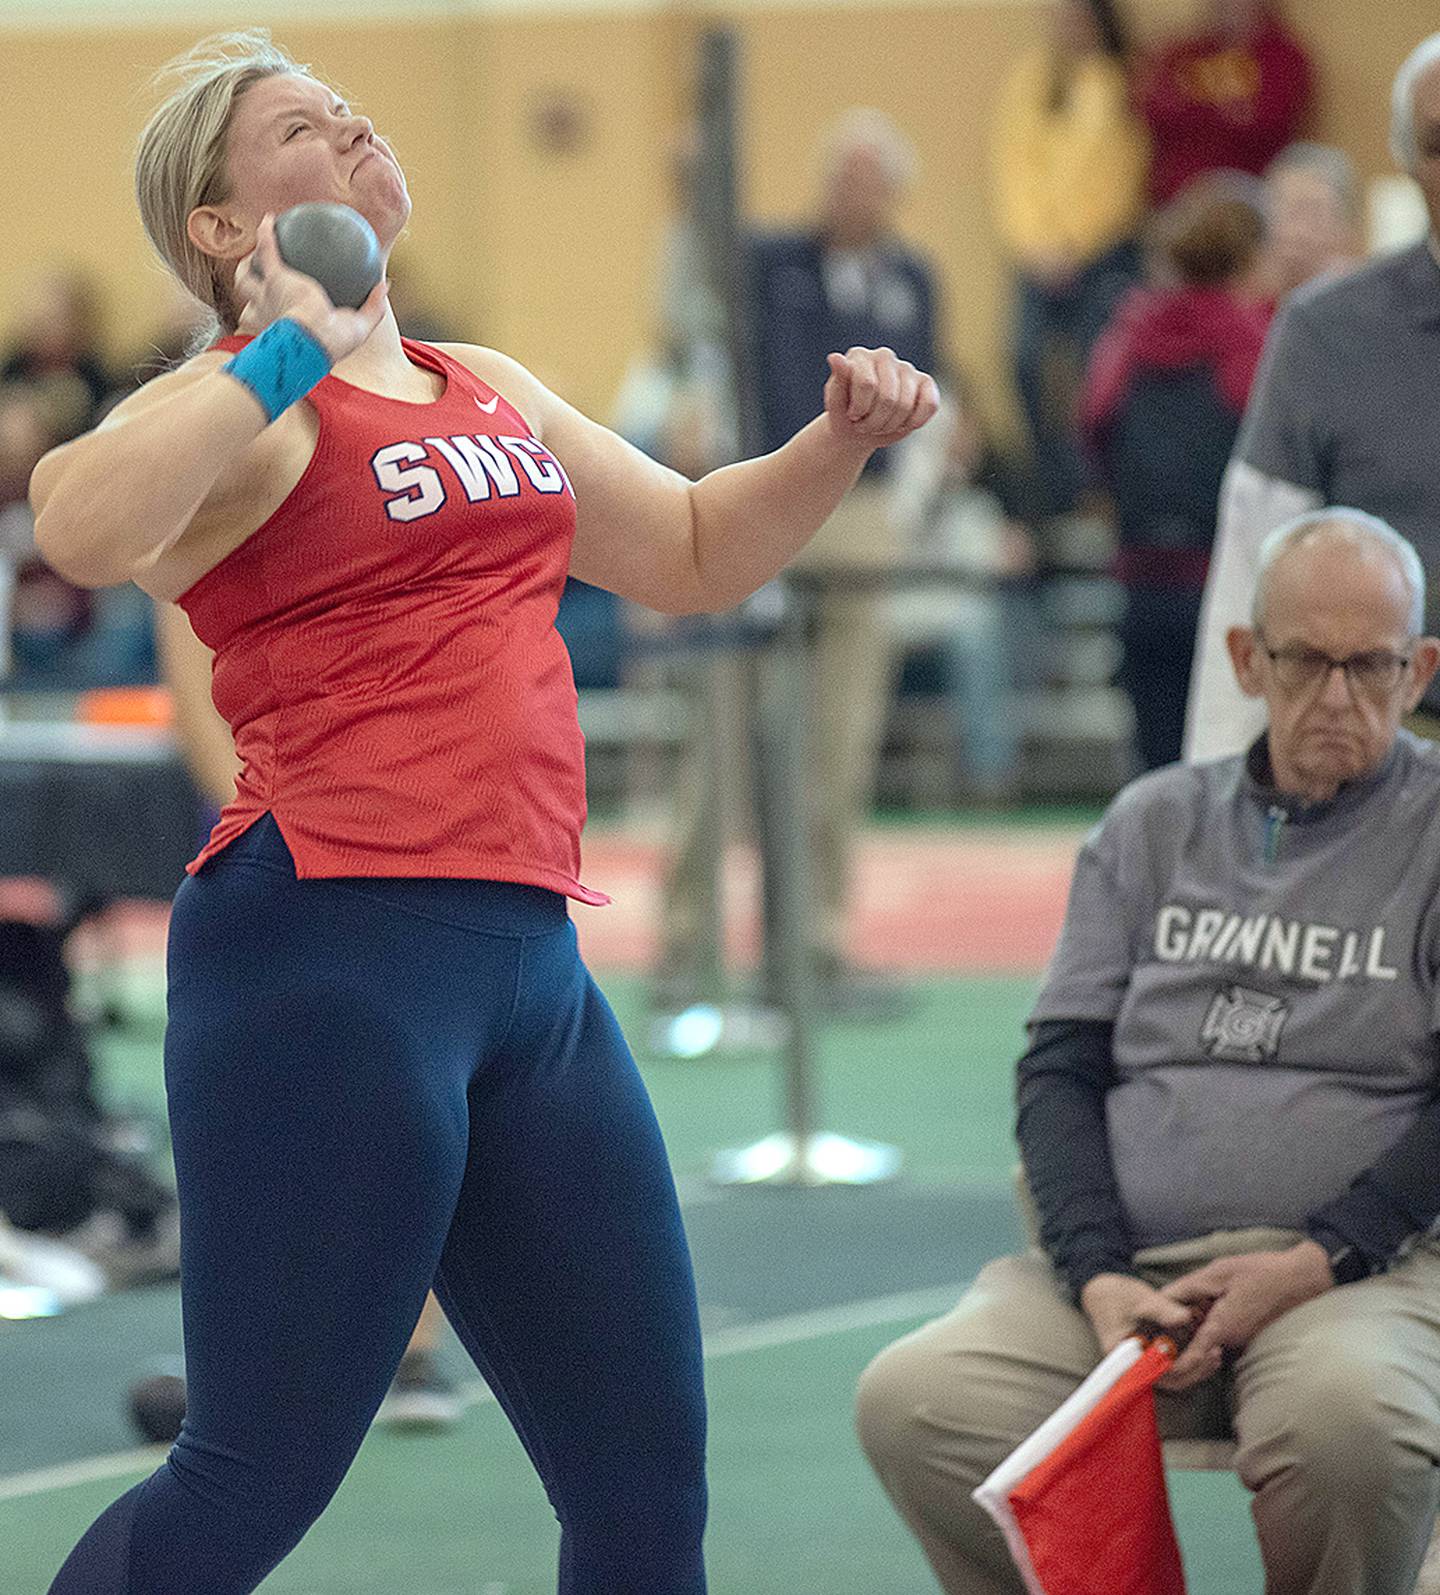 Abbi Richter of Southwestern is shown throwing the shot put during the indoor season. Richter, from Atlantic, moved to second all-time at SWCC in the indoor weight throw at 12.43 meters. She ranks eighth all-time in the shot put at 9.64 (31 feet, 7.5 inches).